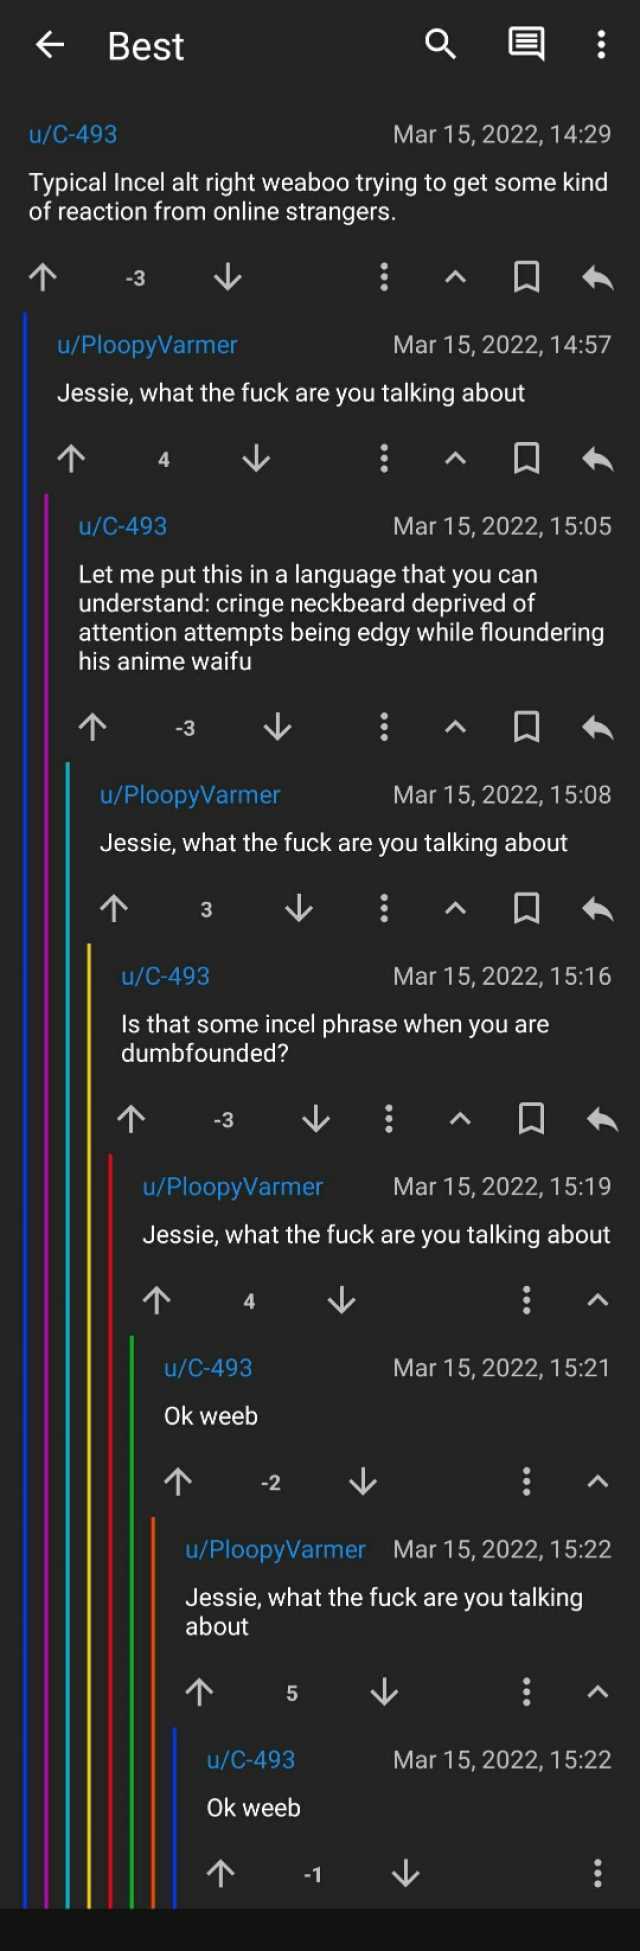 Best u/C-493 Mar 15 2022 1429 Typical Incel alt right weaboo trying to get some kind of reaction from online strangers. -3 u/PloopyVarmer Mar 15 2022 1457 Jessie what the fuck are you talking about T 4 u/C-493 Mar 15 2022 1505 Let